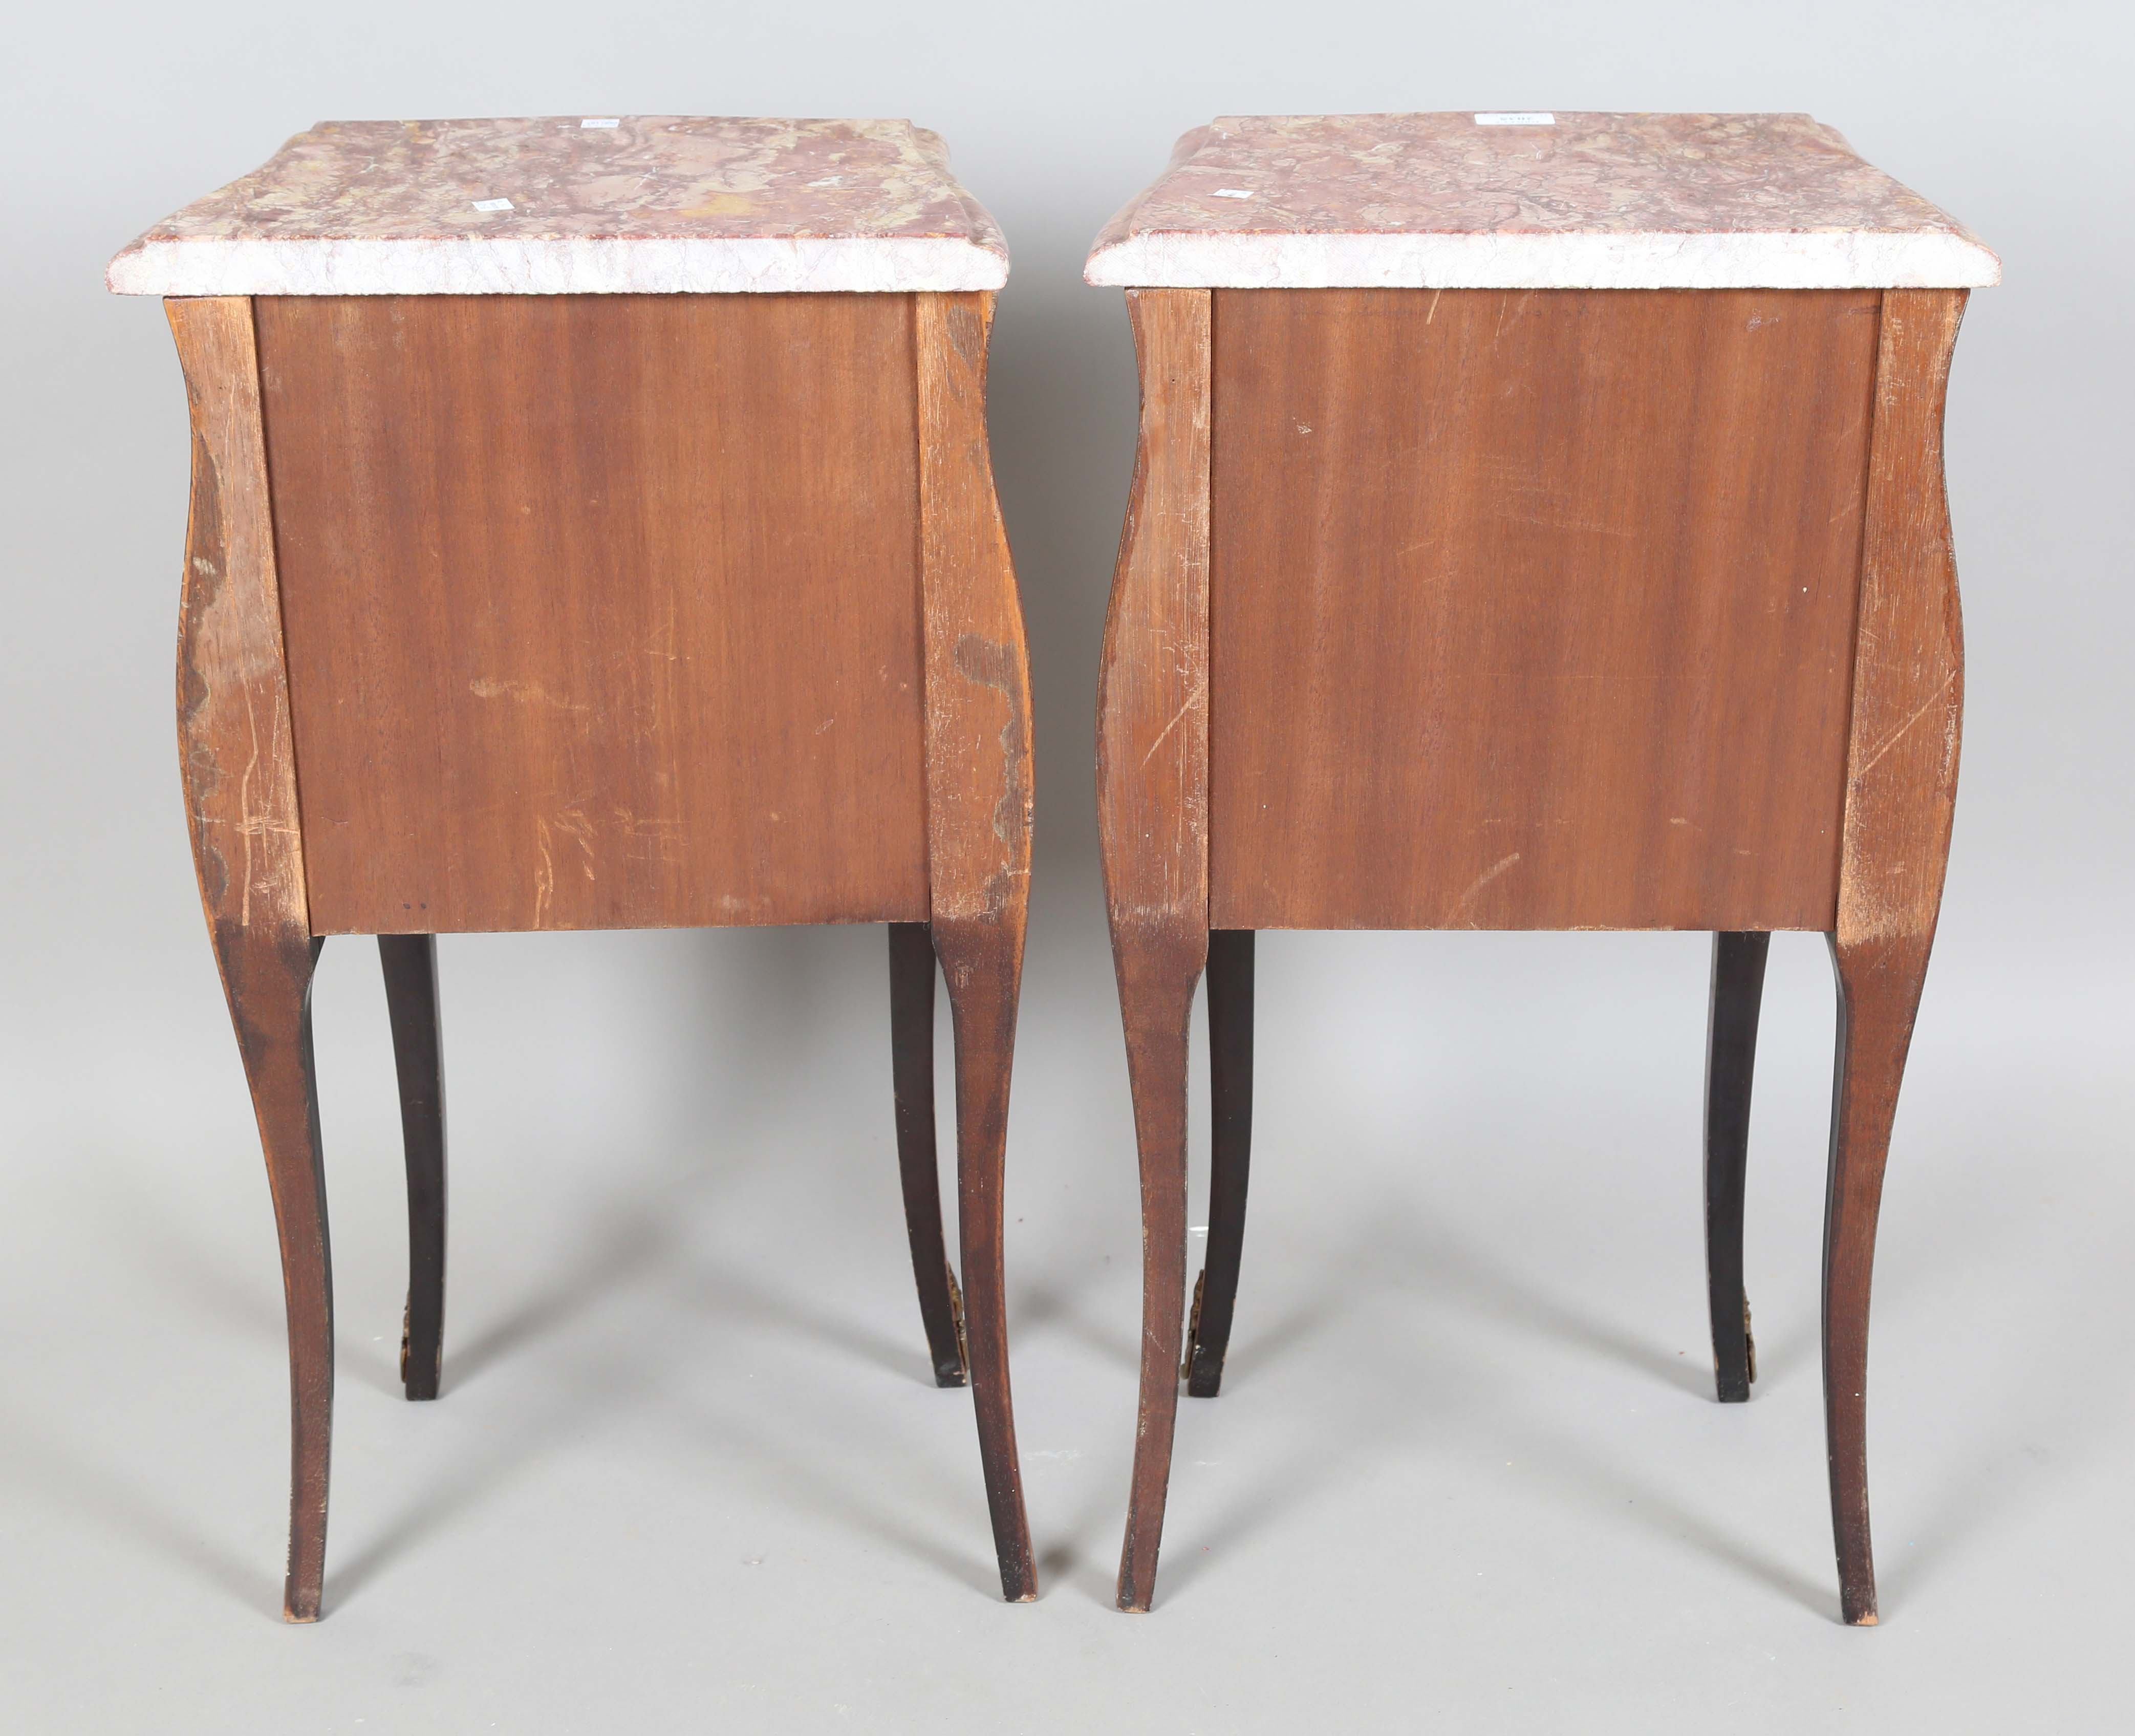 A pair of 20th century French kingwood marble-topped bedside chests with applied gilt metal - Image 3 of 7